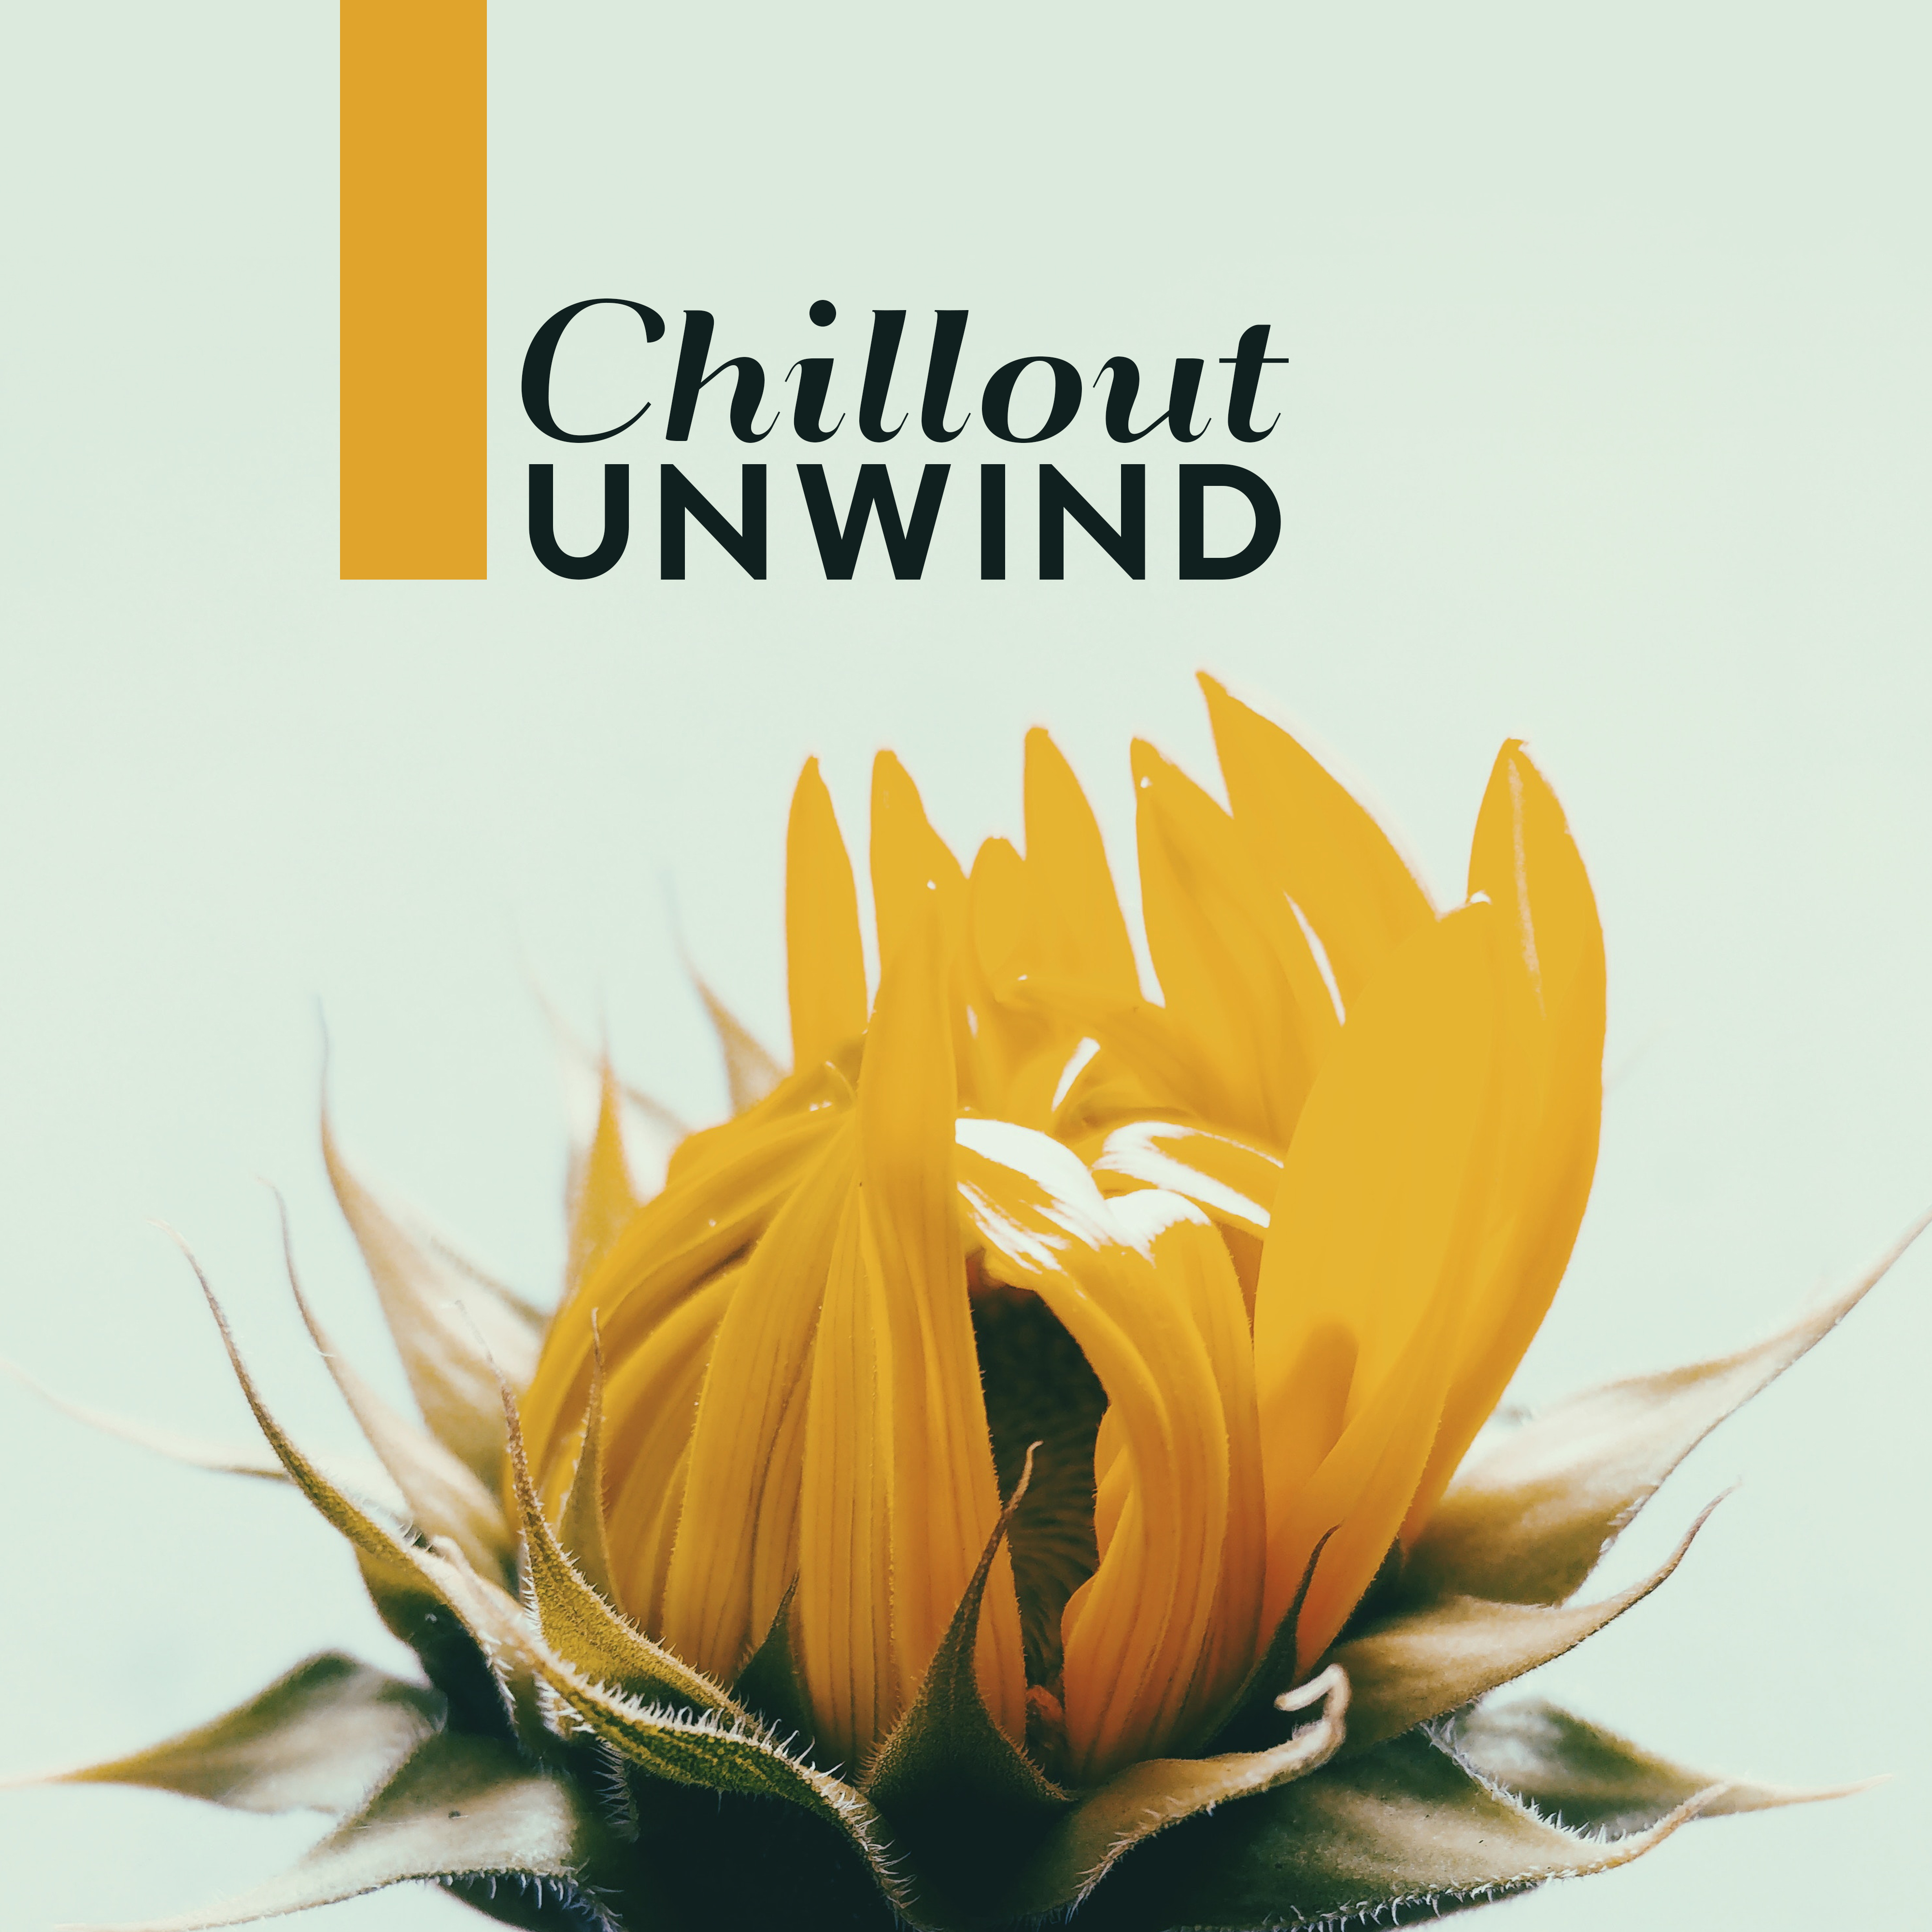 Chillout Unwind: Chill Out and Relax with a Slow, Calm and Relaxed Chillout Music